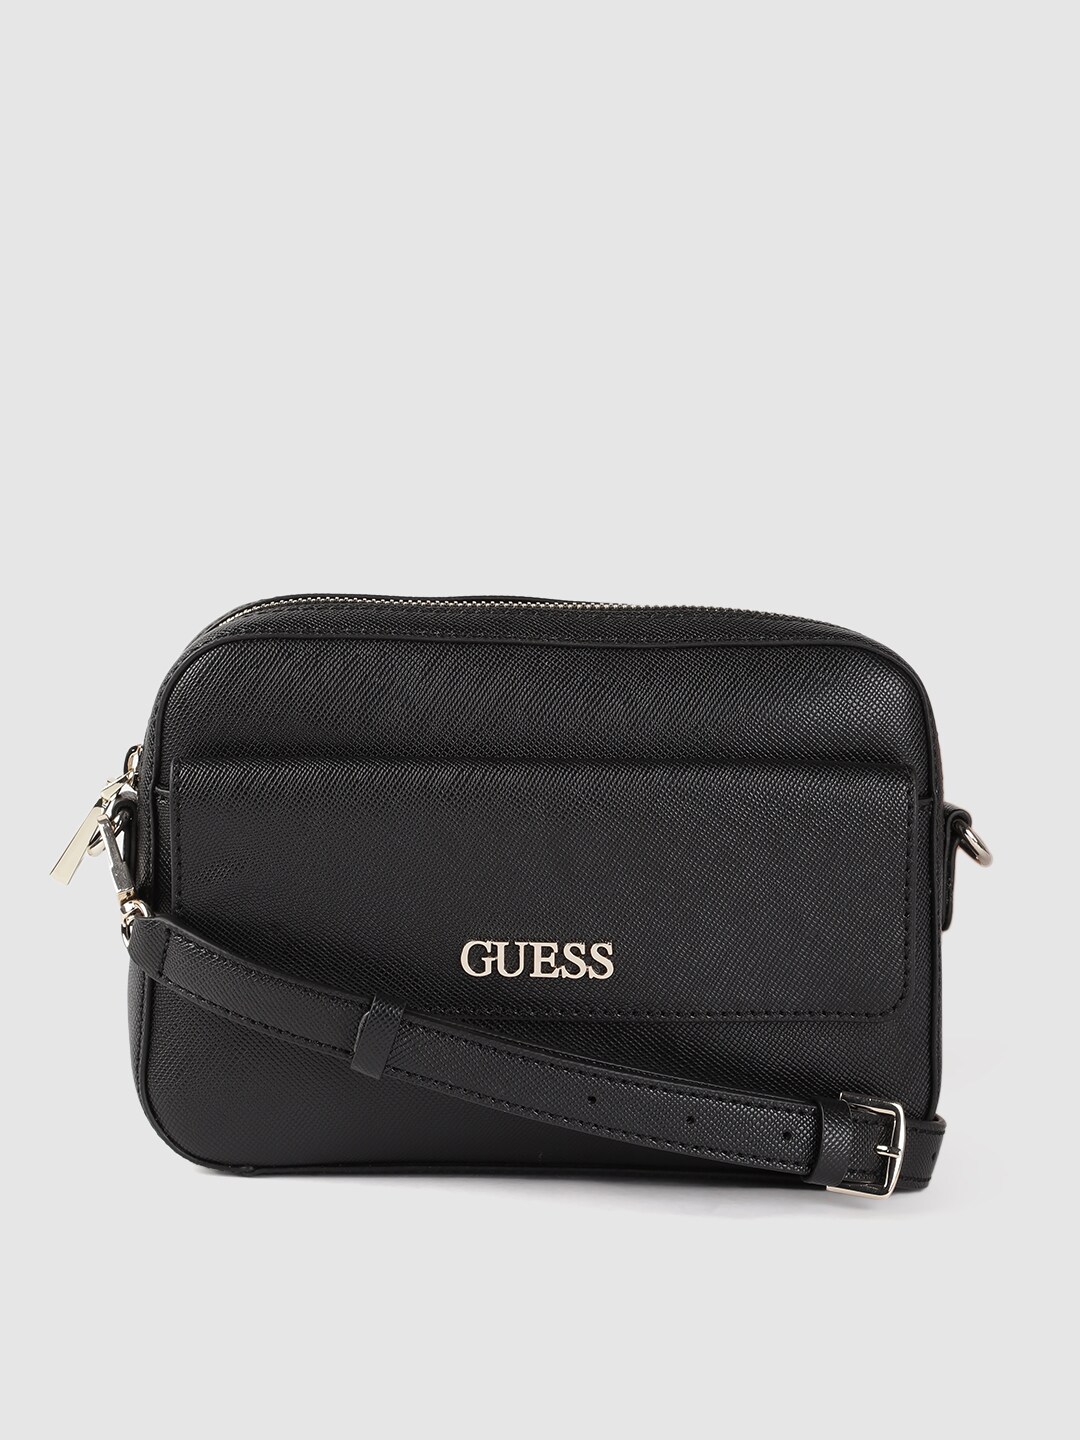 GUESS Black Textured PU Structured Sling Bag Price in India